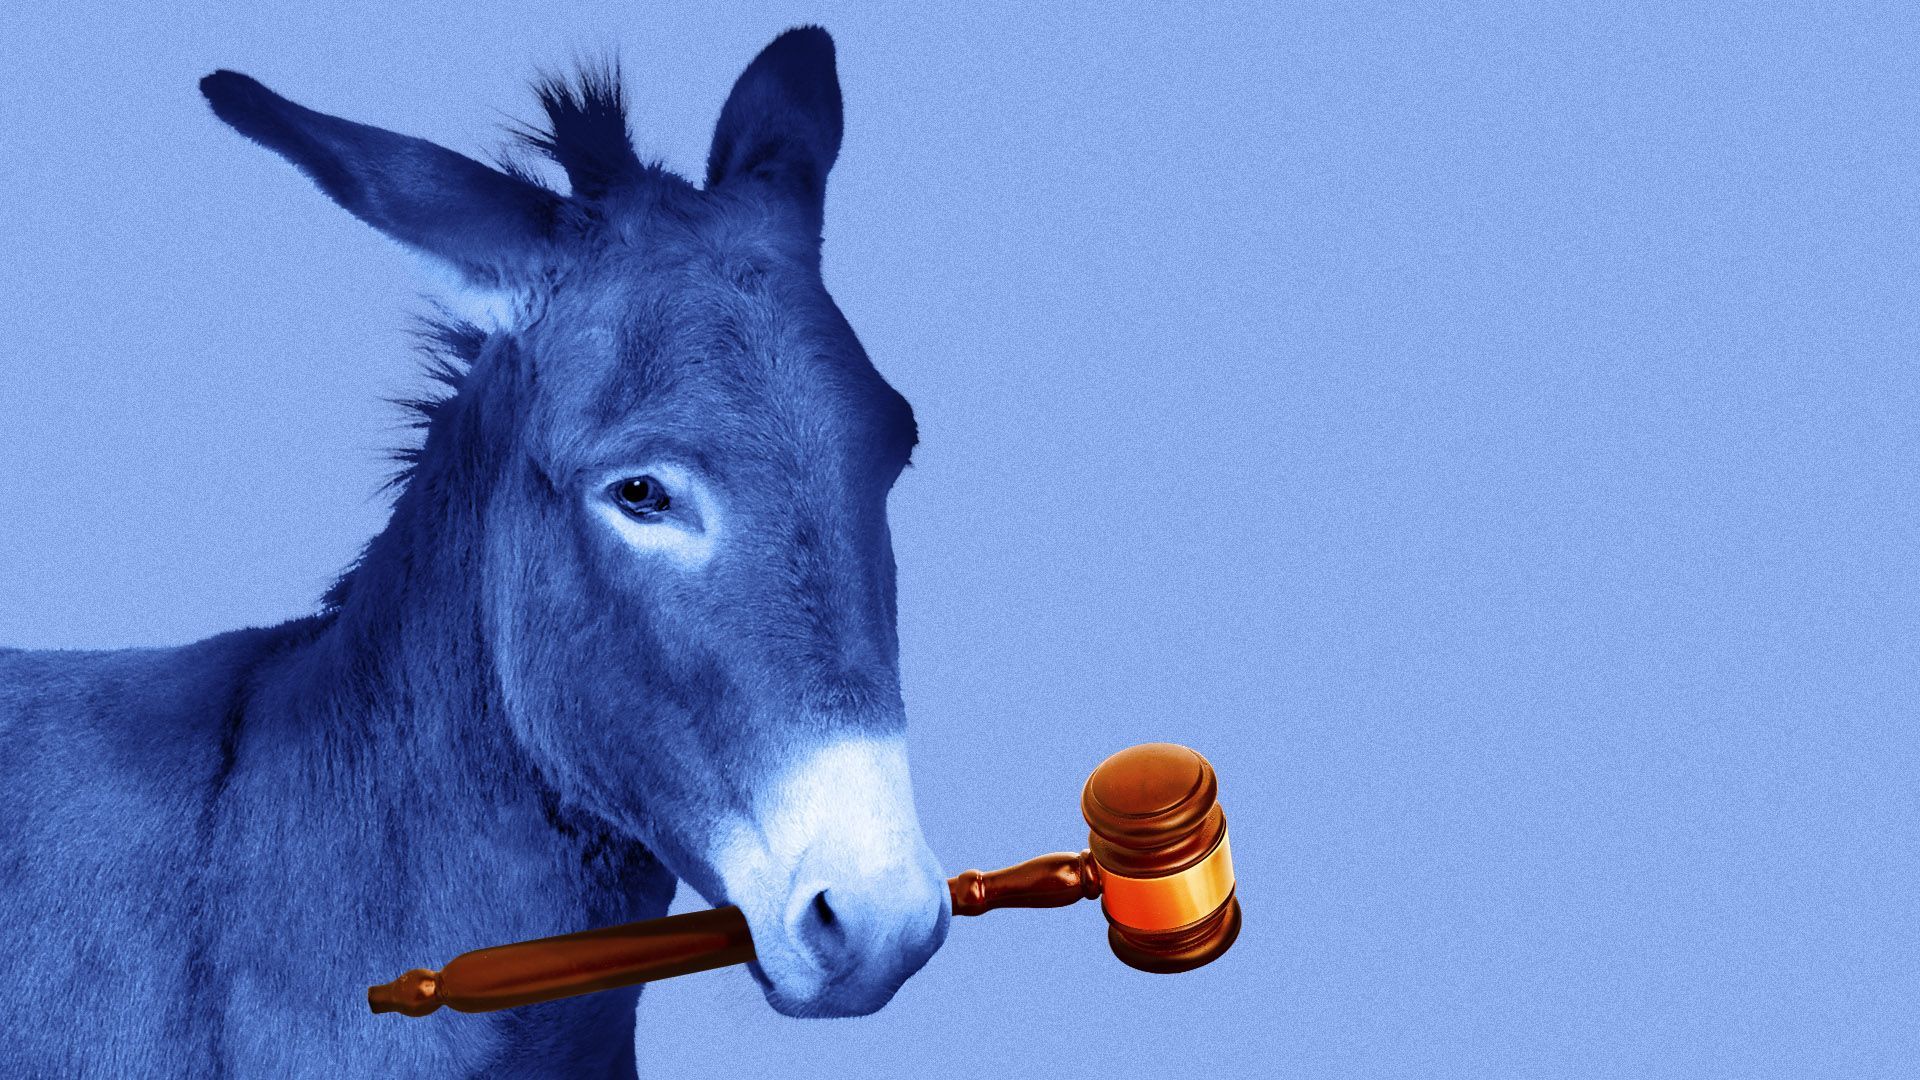 Illustration of a donkey with a gavel in its mouth